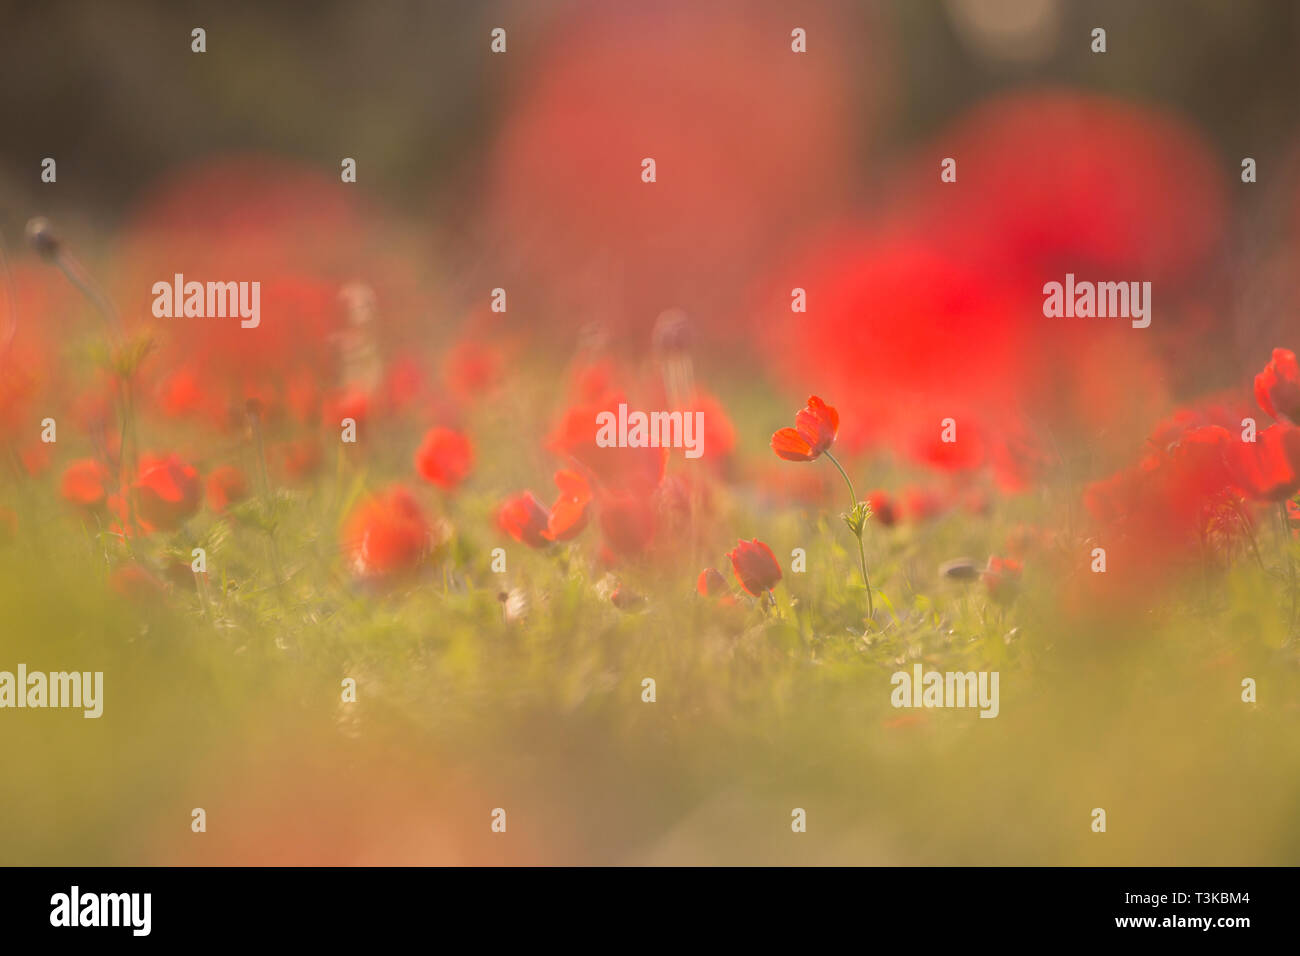 Selective focus on a field of red Anemone coronaria (Poppy Anemone). Photographed in Israel in Spring February Stock Photo